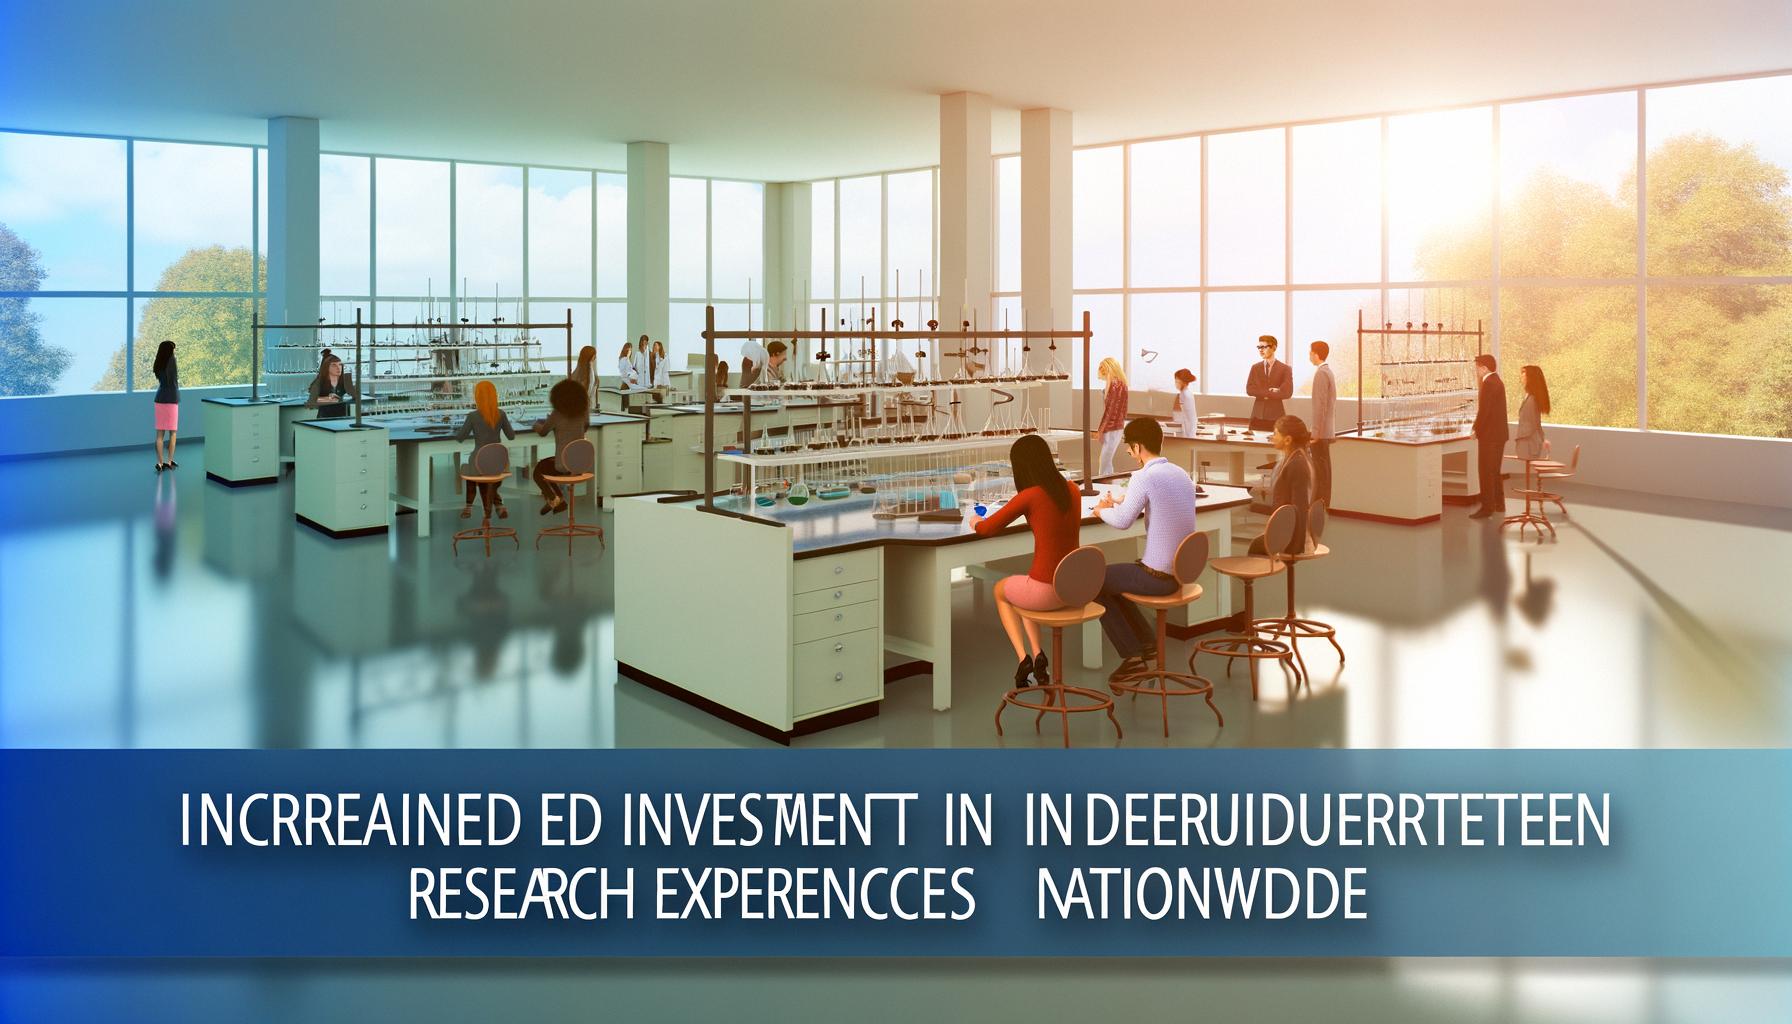 Increased investment in undergraduate research experiences nationwide Balanced News